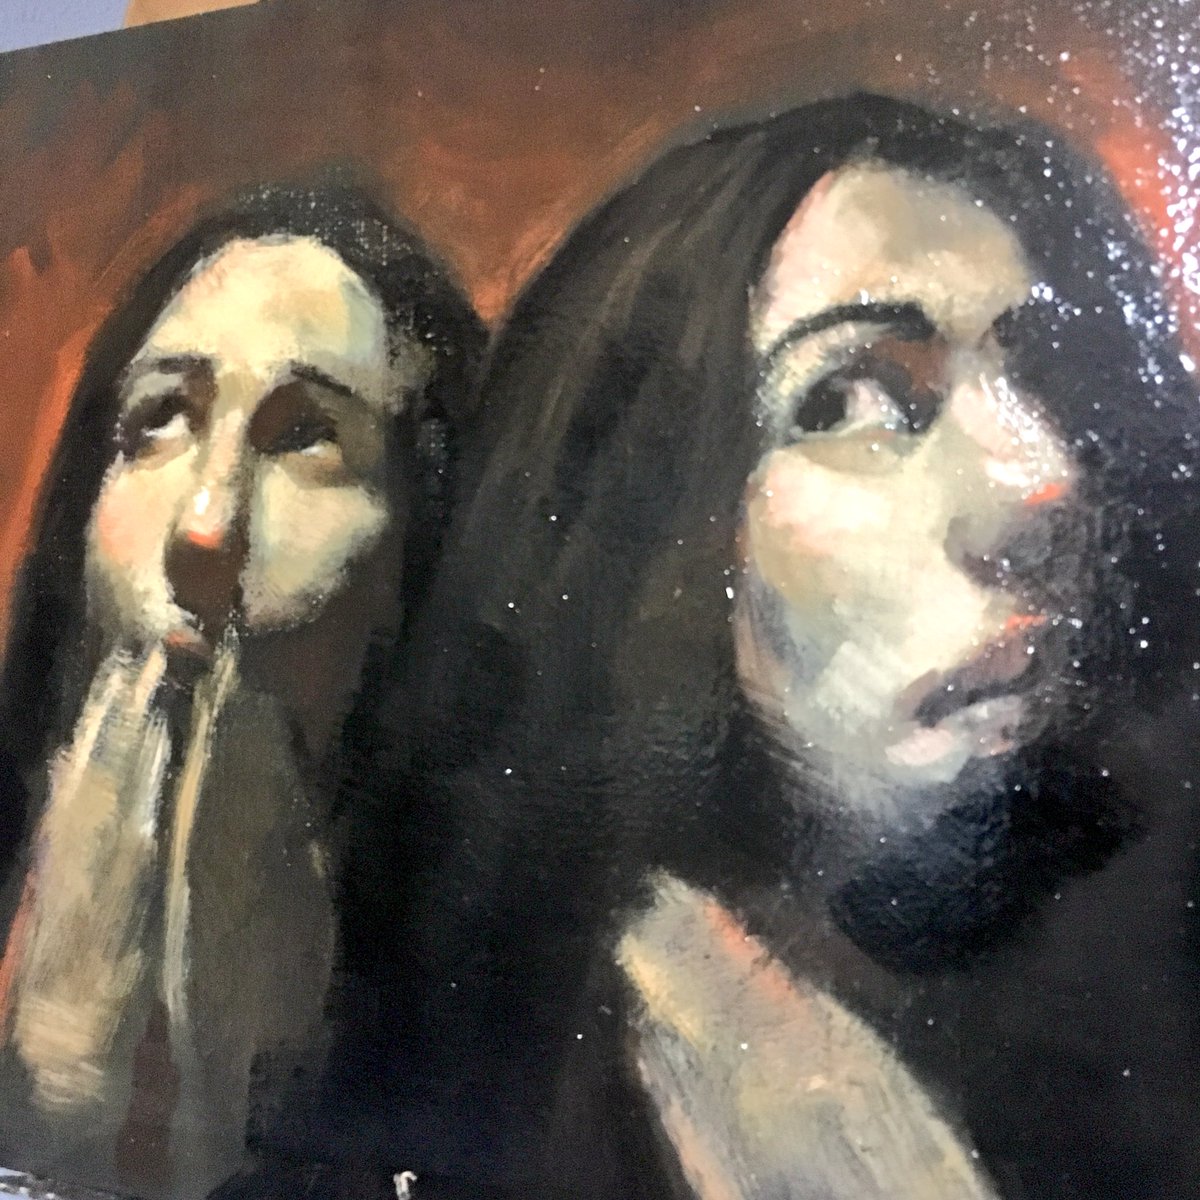 Varnishing day for these two ladies. #oilpainting #varnishday #keepinitsurreal